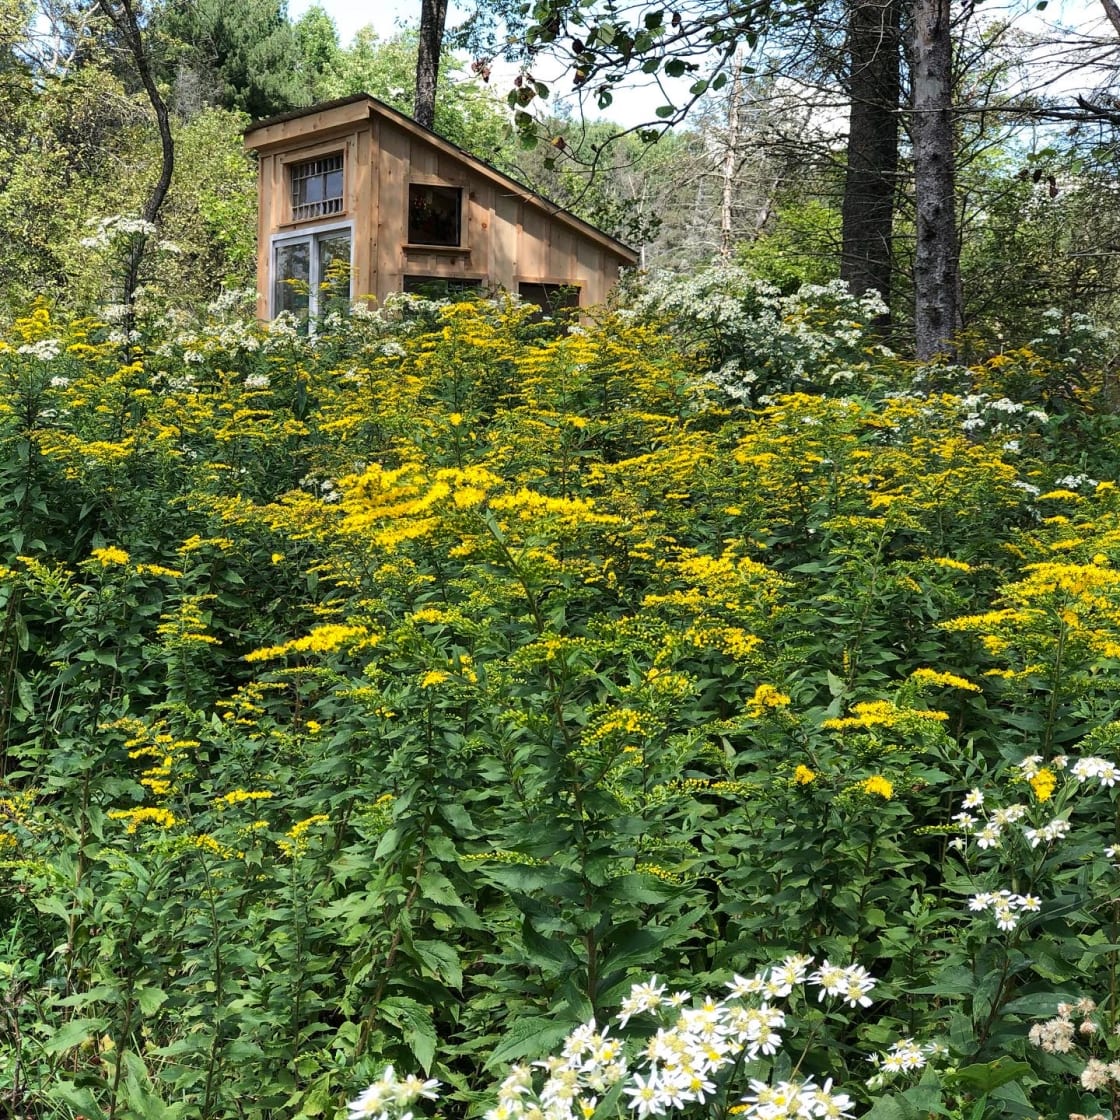 The glass chapel. The goldenrod is in bloom in September.